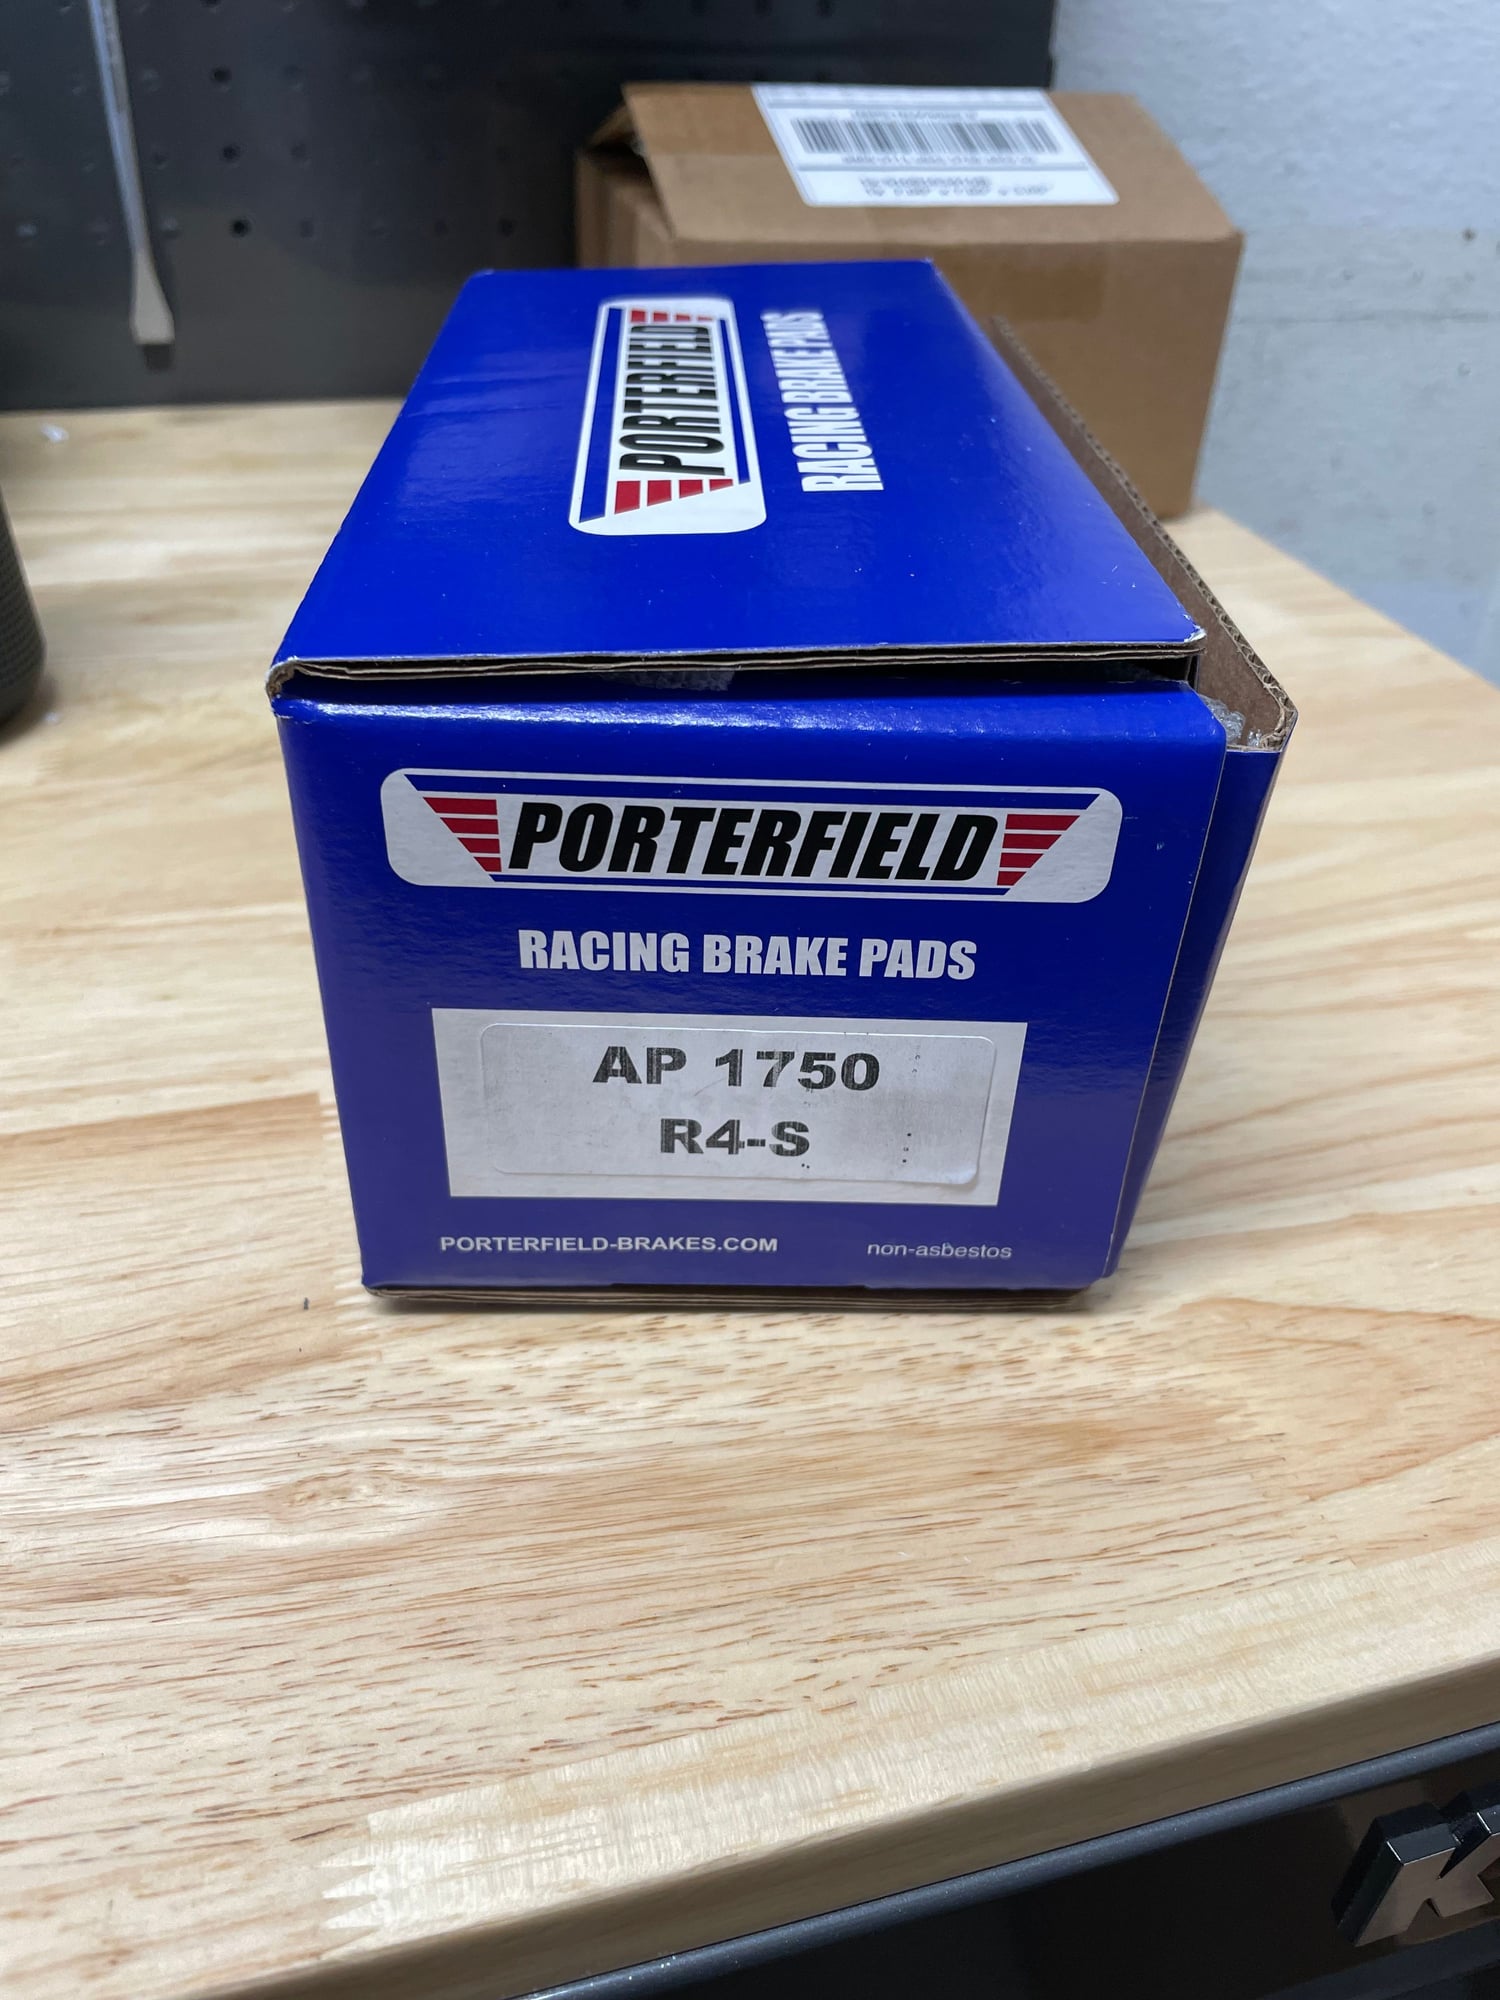 Brakes - Porterfield RS-4 Front Brake Pads for 380 mm F-Type brakes (Grey or Red Calipers) - New - 2015 to 2019 Jaguar F-Type - East Bay, Ca, CA 94579, United States